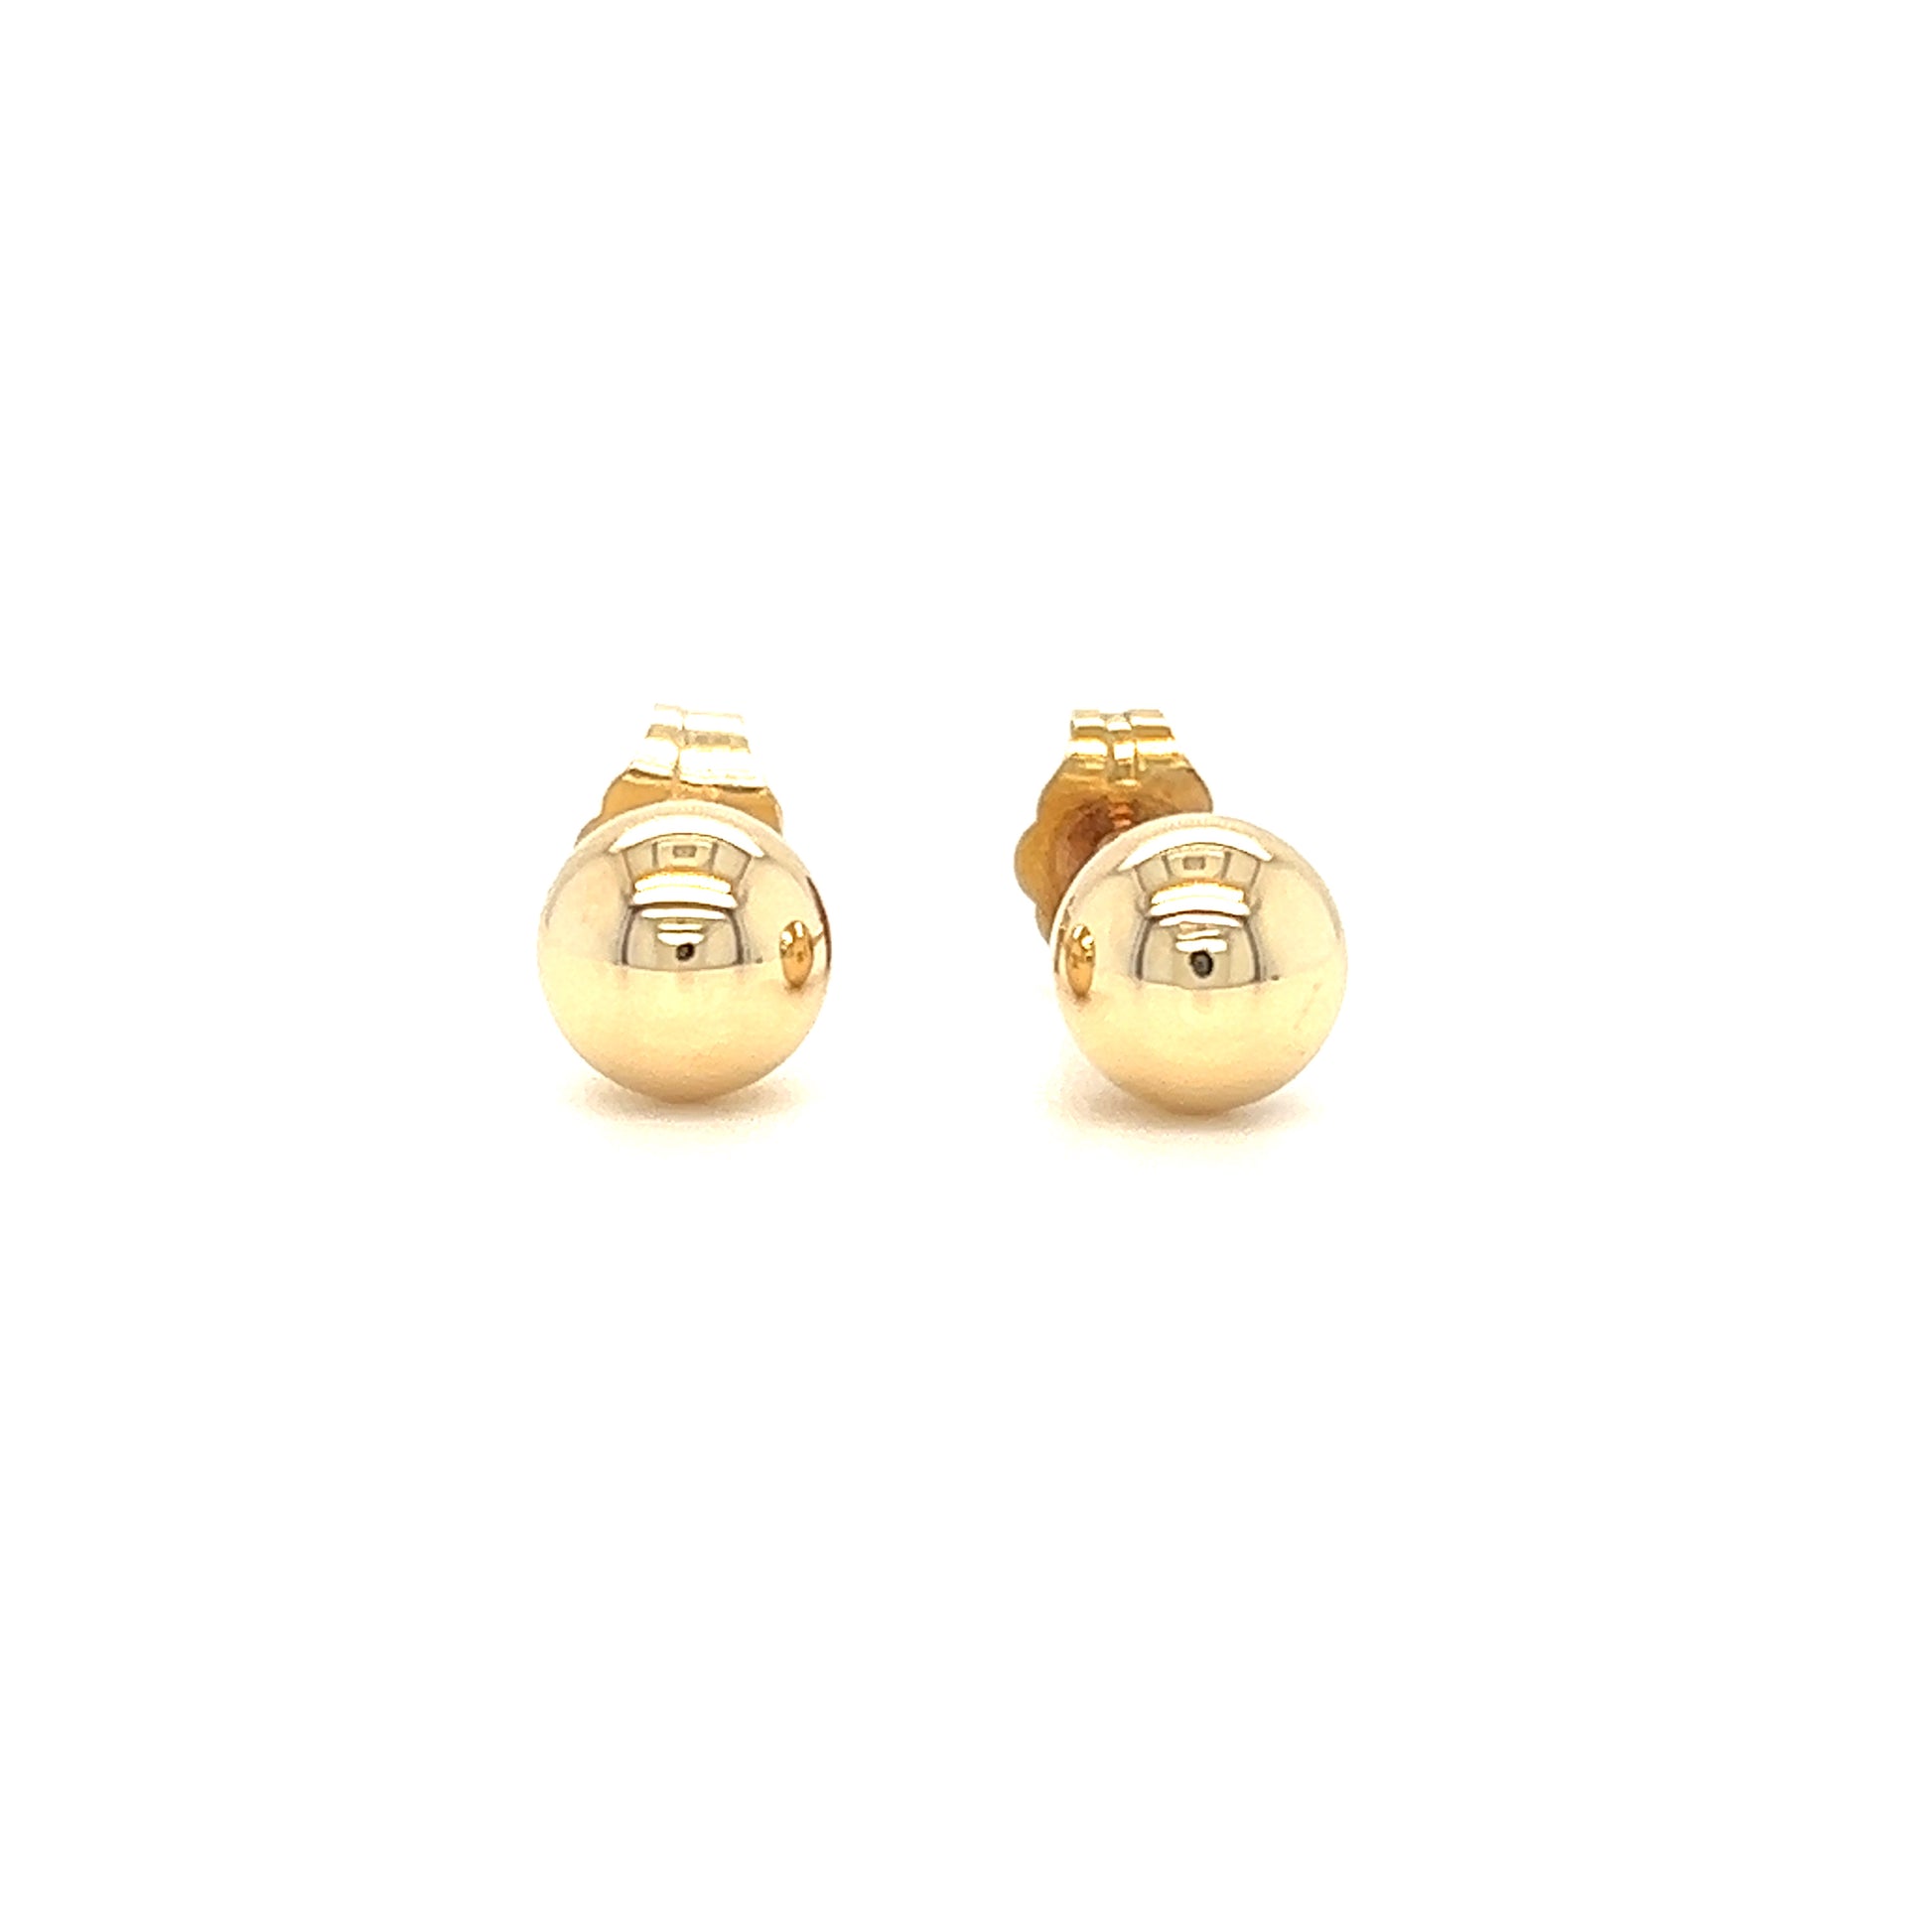 Ball 6mm Stud Earrings in 14K Yellow Gold Front View